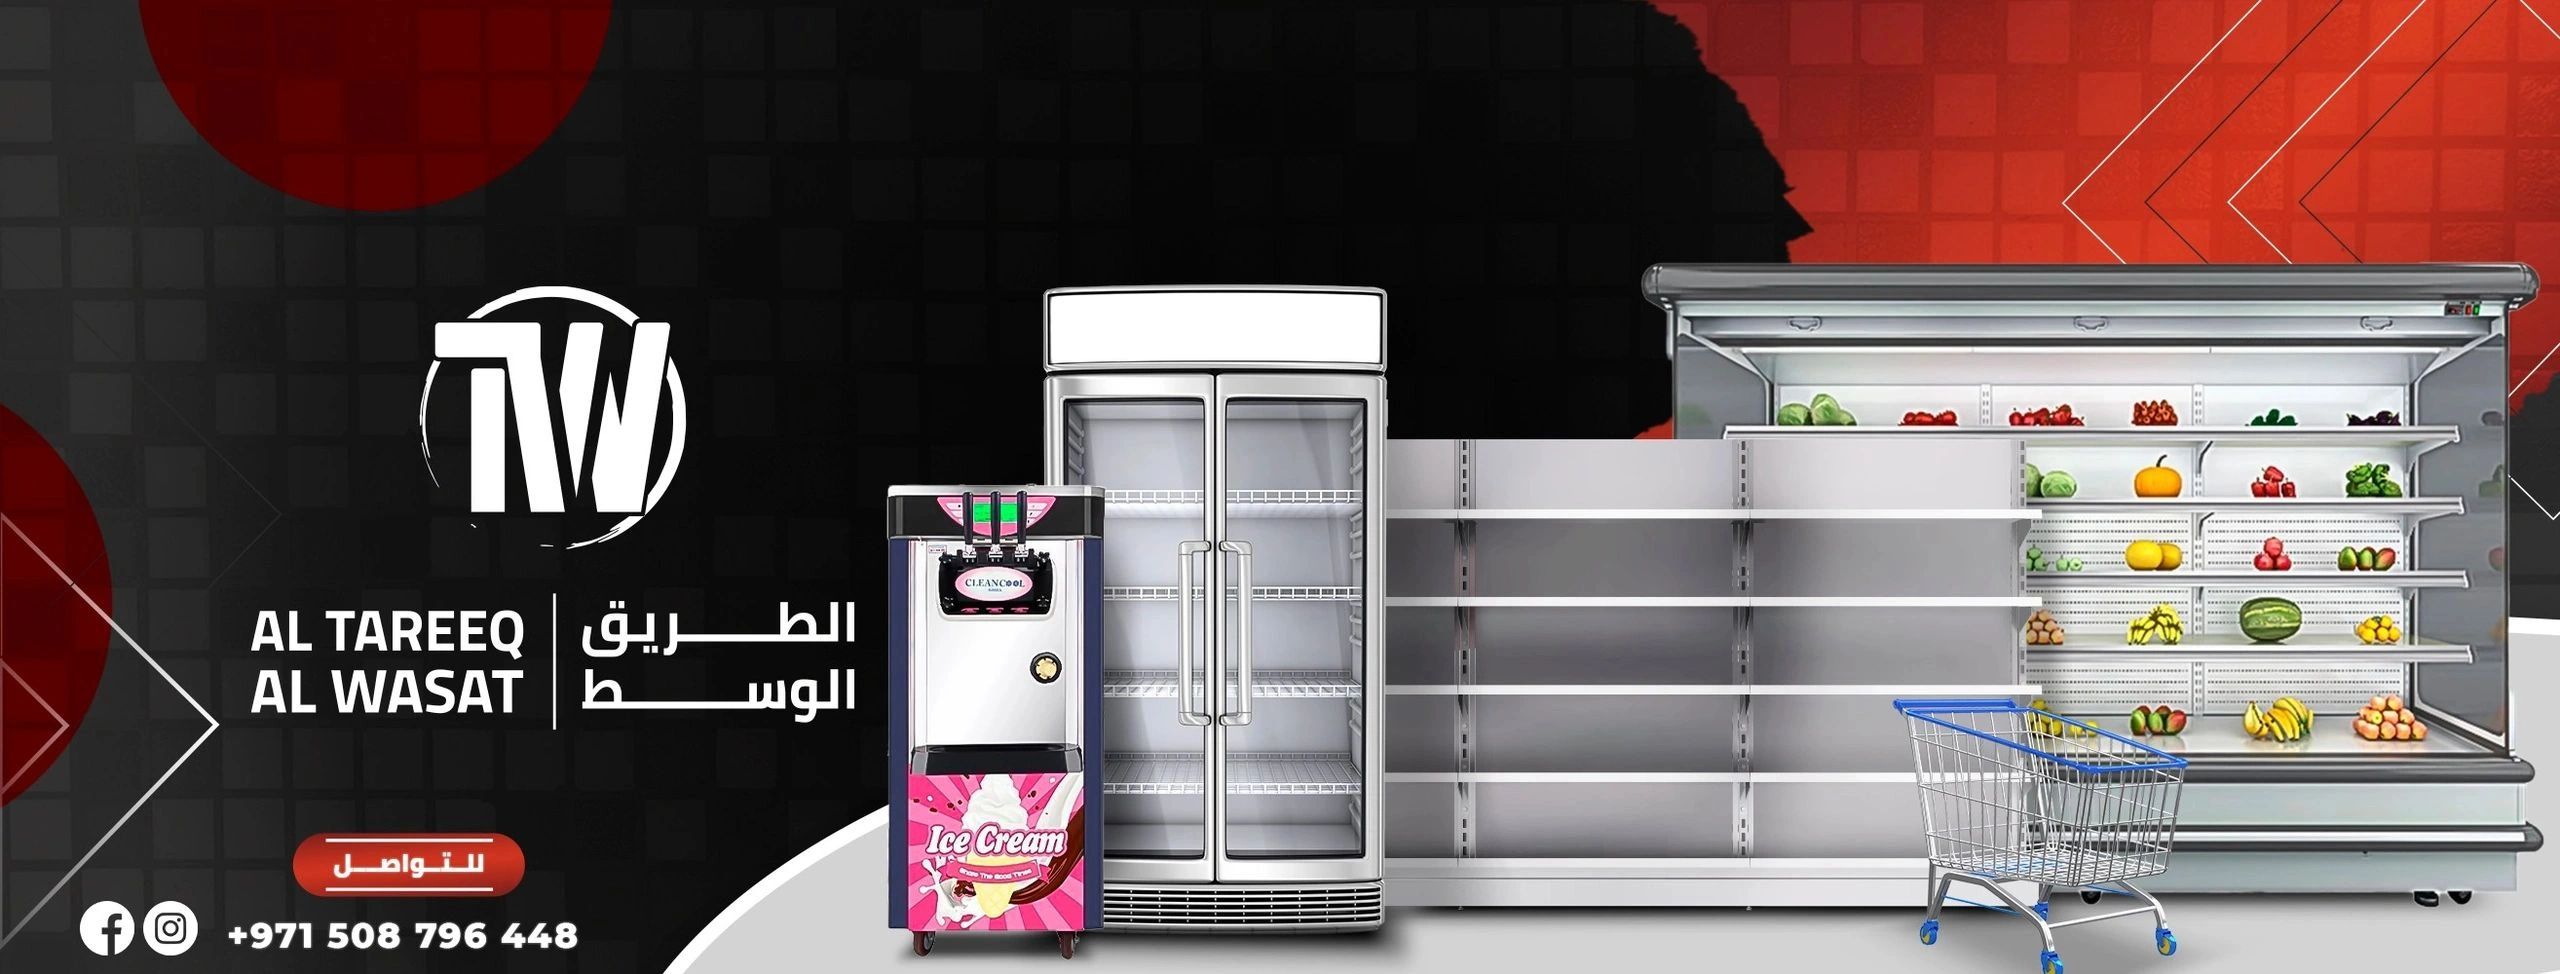 Altareeq Alwasat provides all the types of supermarket and kitchen equipment